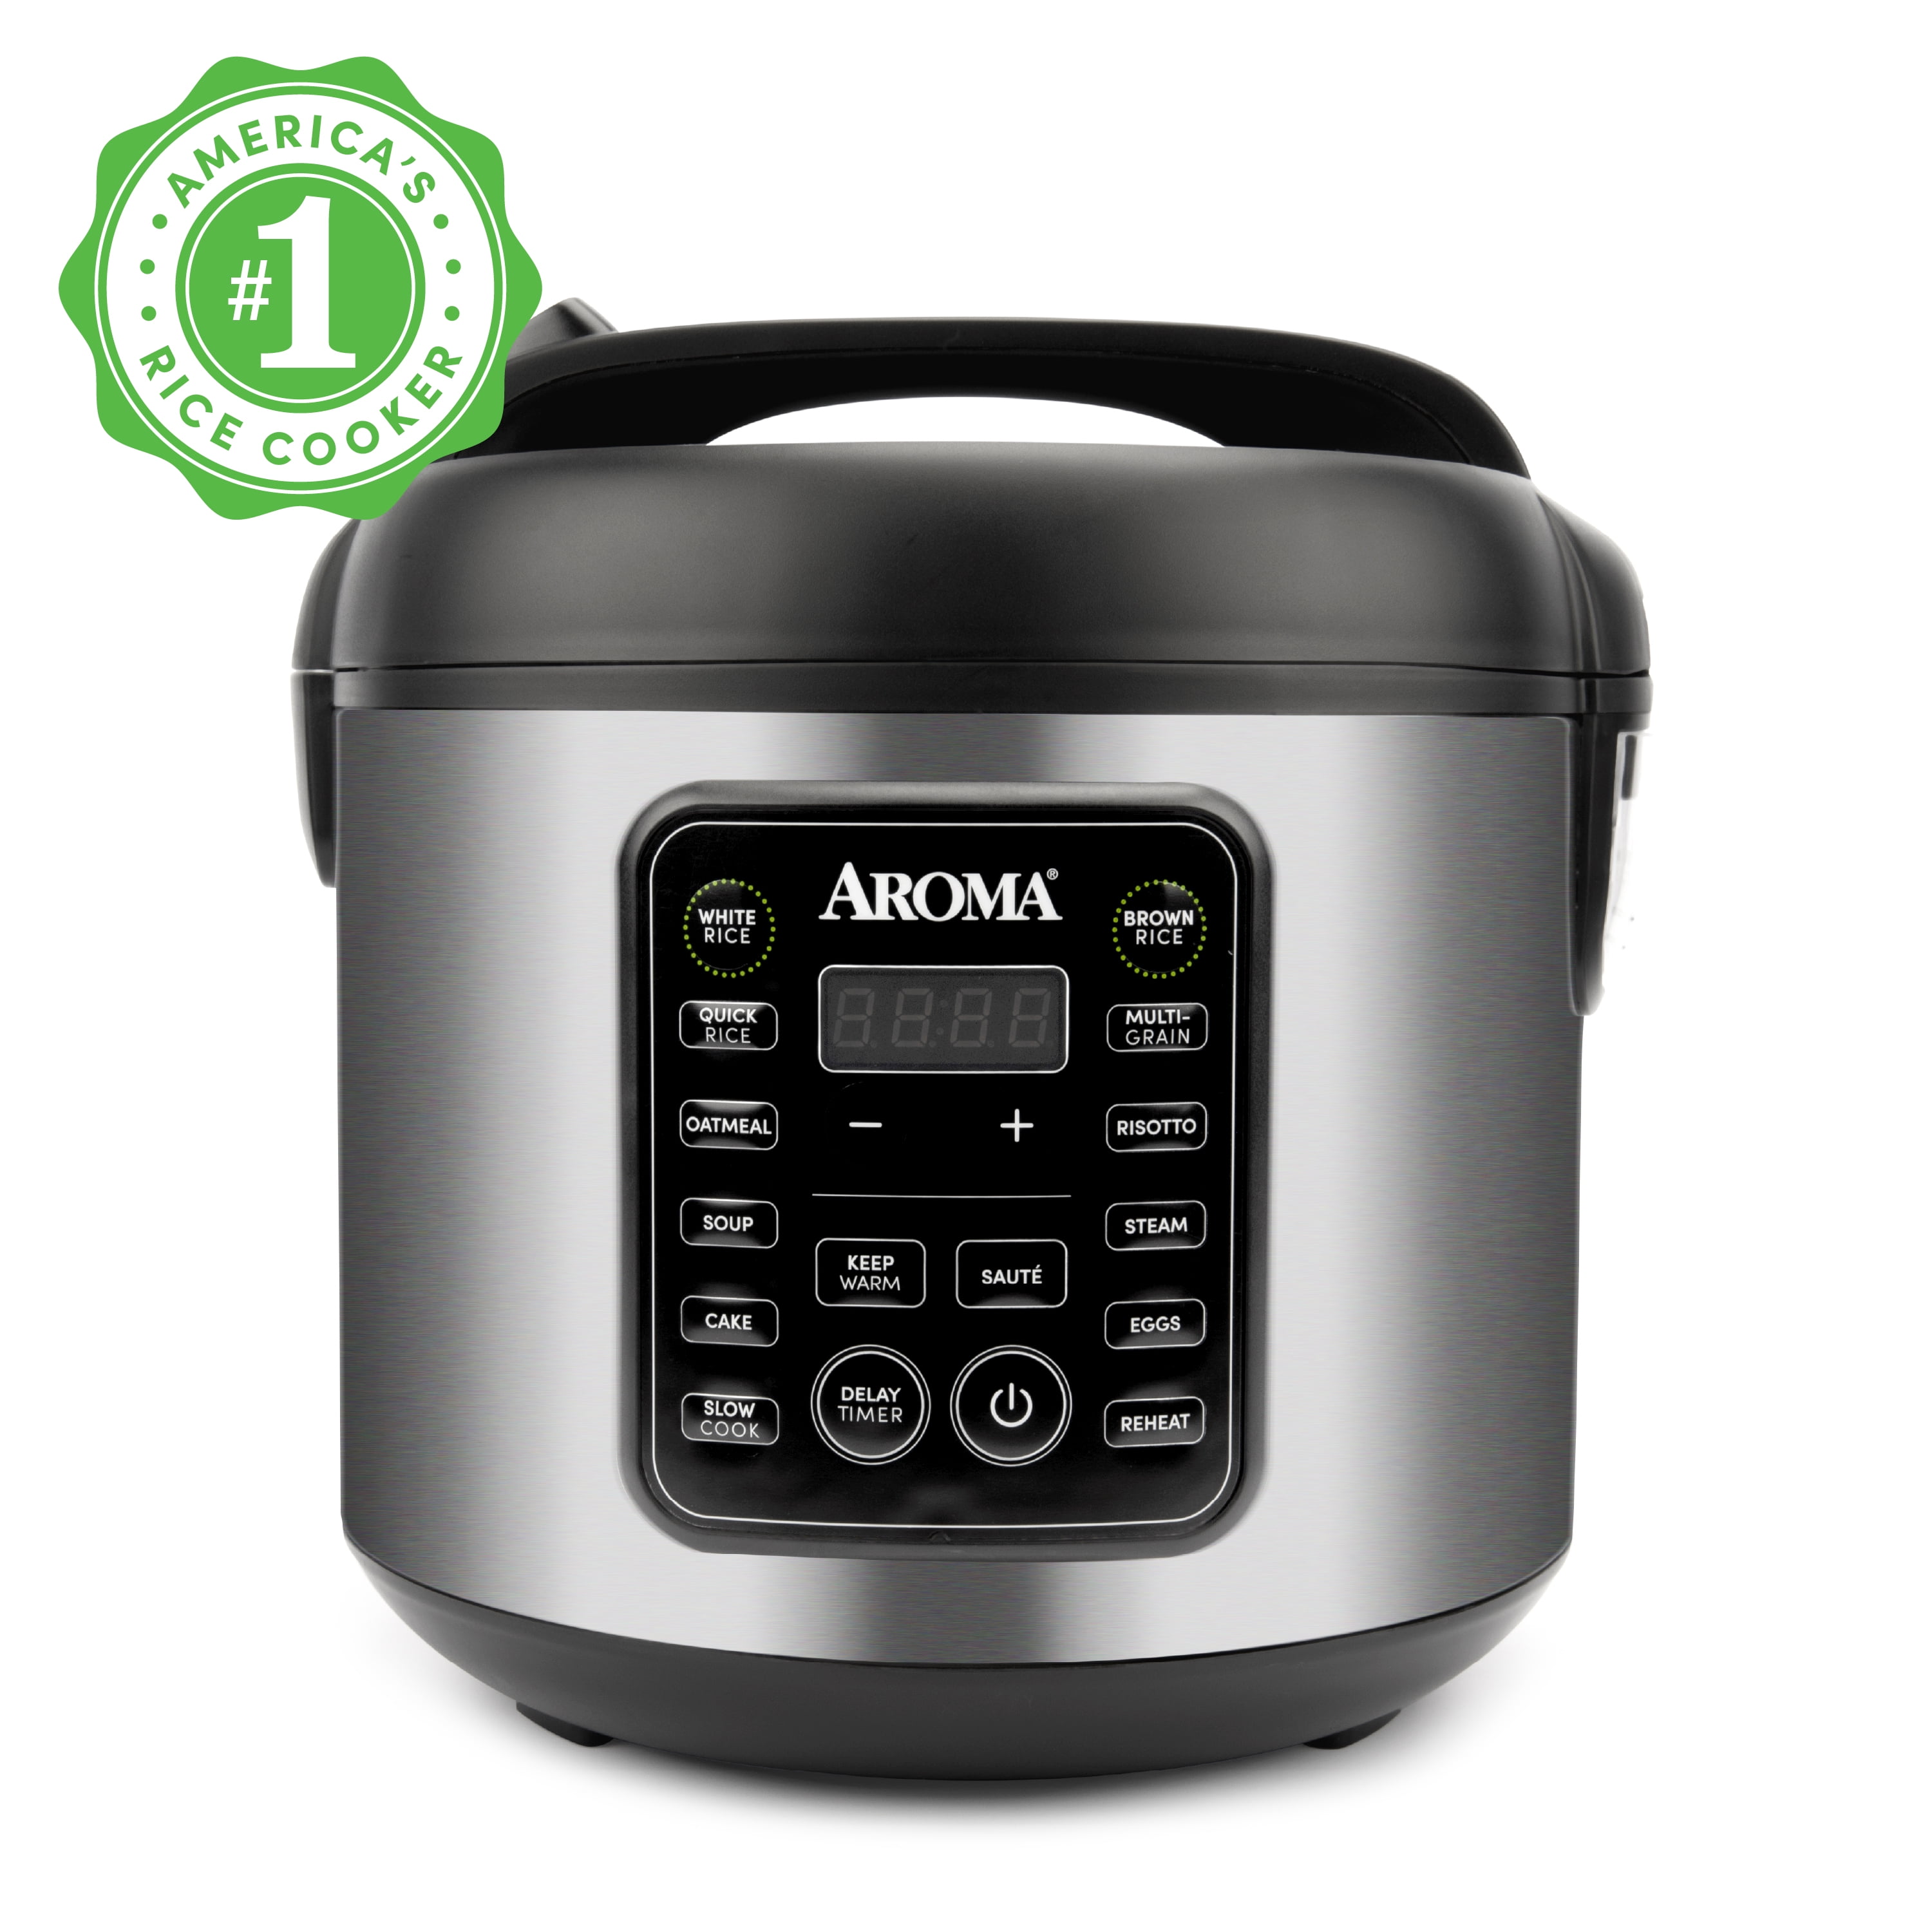 10 cup uncooked Digital Rice Cooker Aroma Housewares 20 Cup Cooked Slow... 